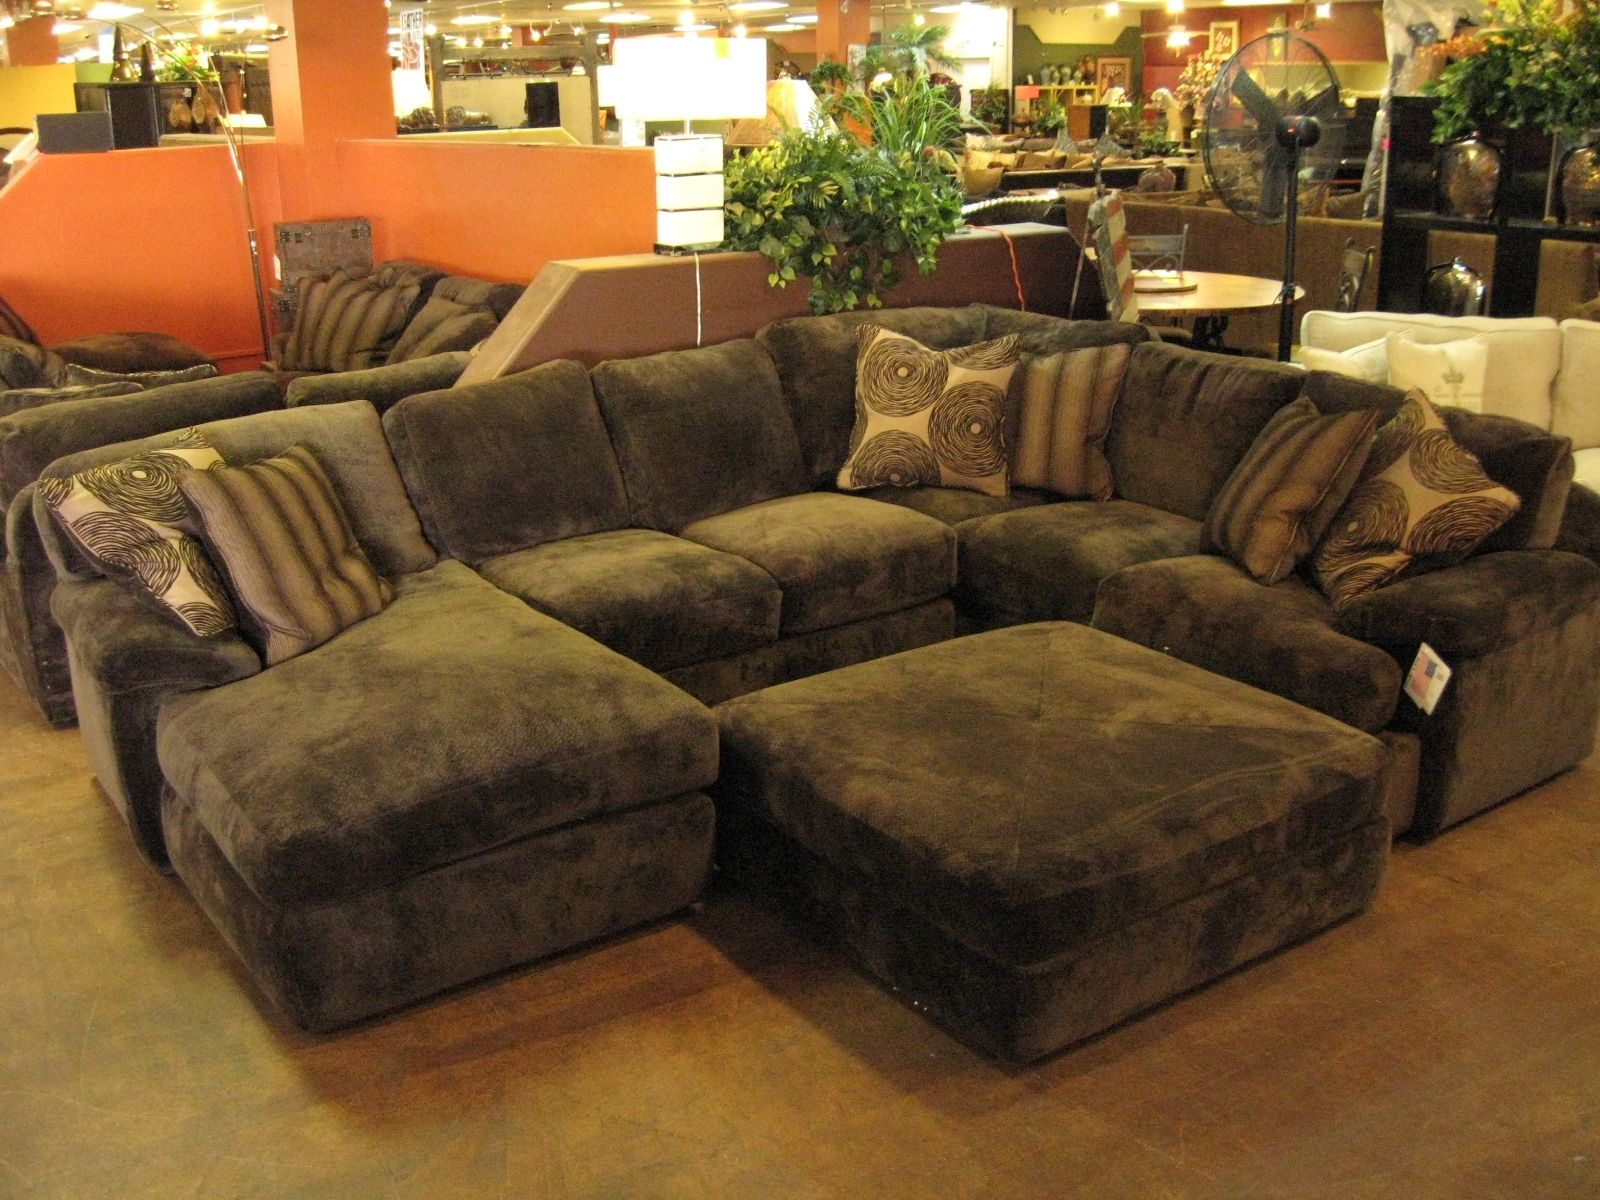 Extra Deep U Shaped Sofa With Chaise And Ottoman Of Gorgeous Extra Inside Sofas With Chaise And Ottoman (View 4 of 10)